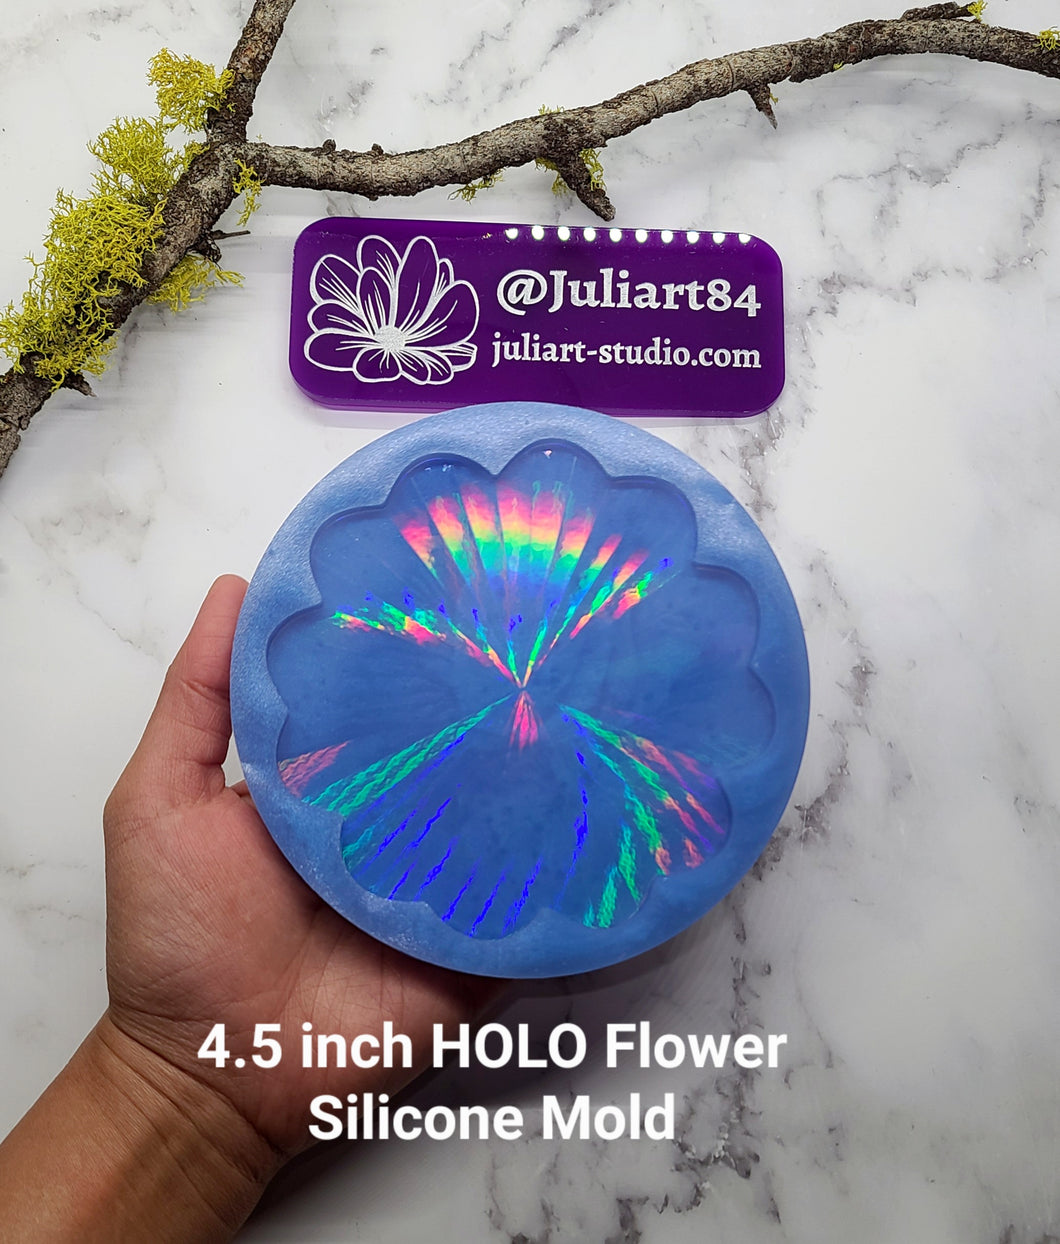 4.5 inch HOLO Flower Silicone Mold for Resin